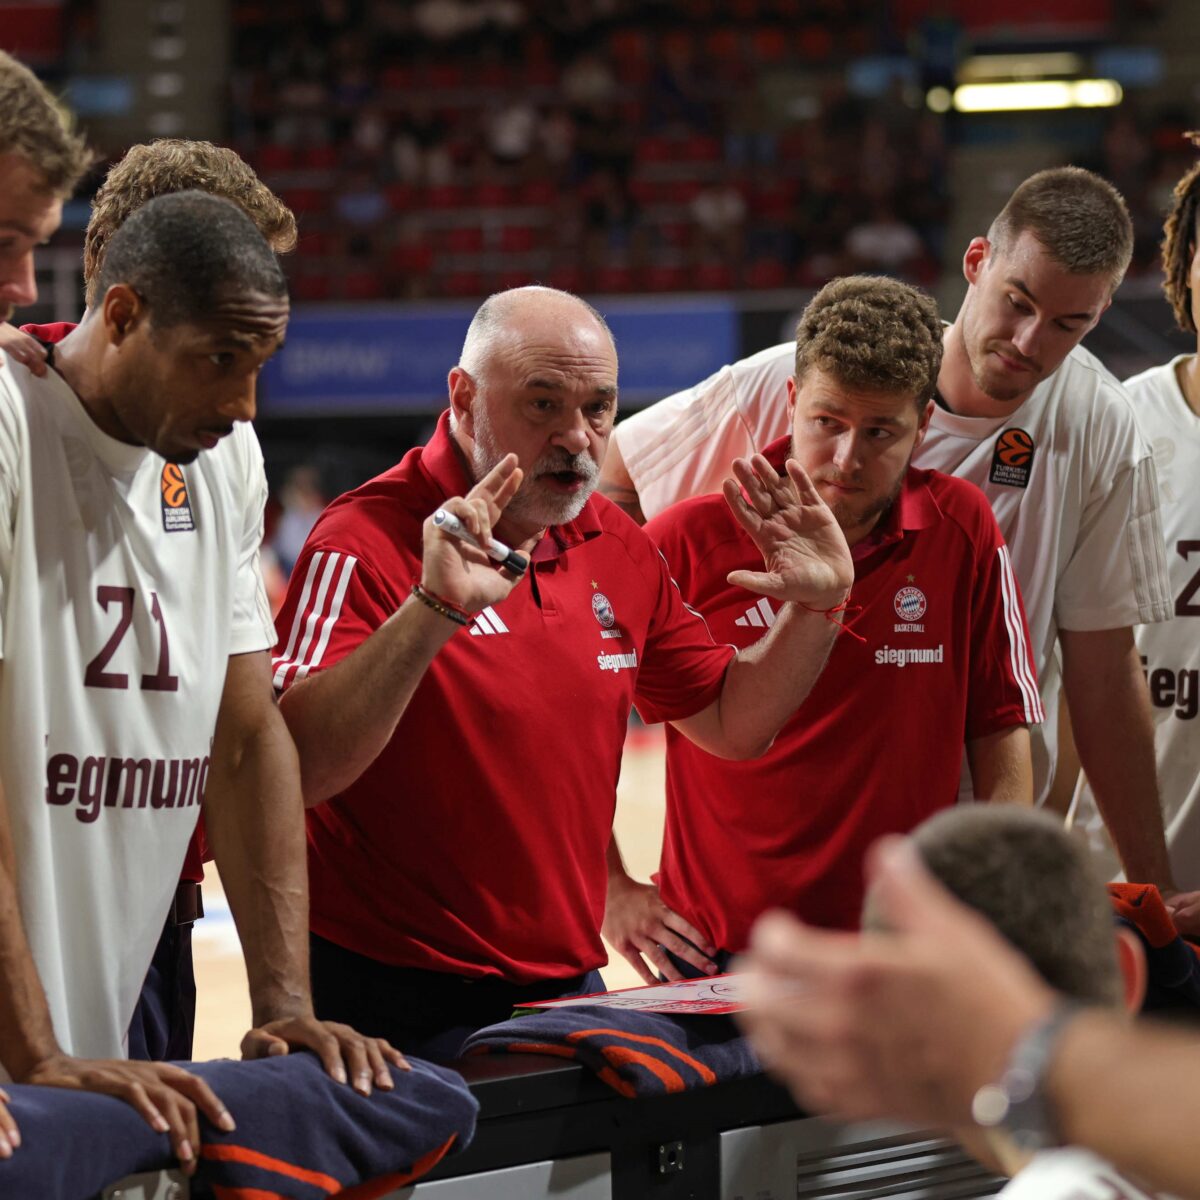 Pablo Laso makes his Euroleague debut as Bayern Munich coach against Alba Berlin. Check out our preview and prediction of the German derby.